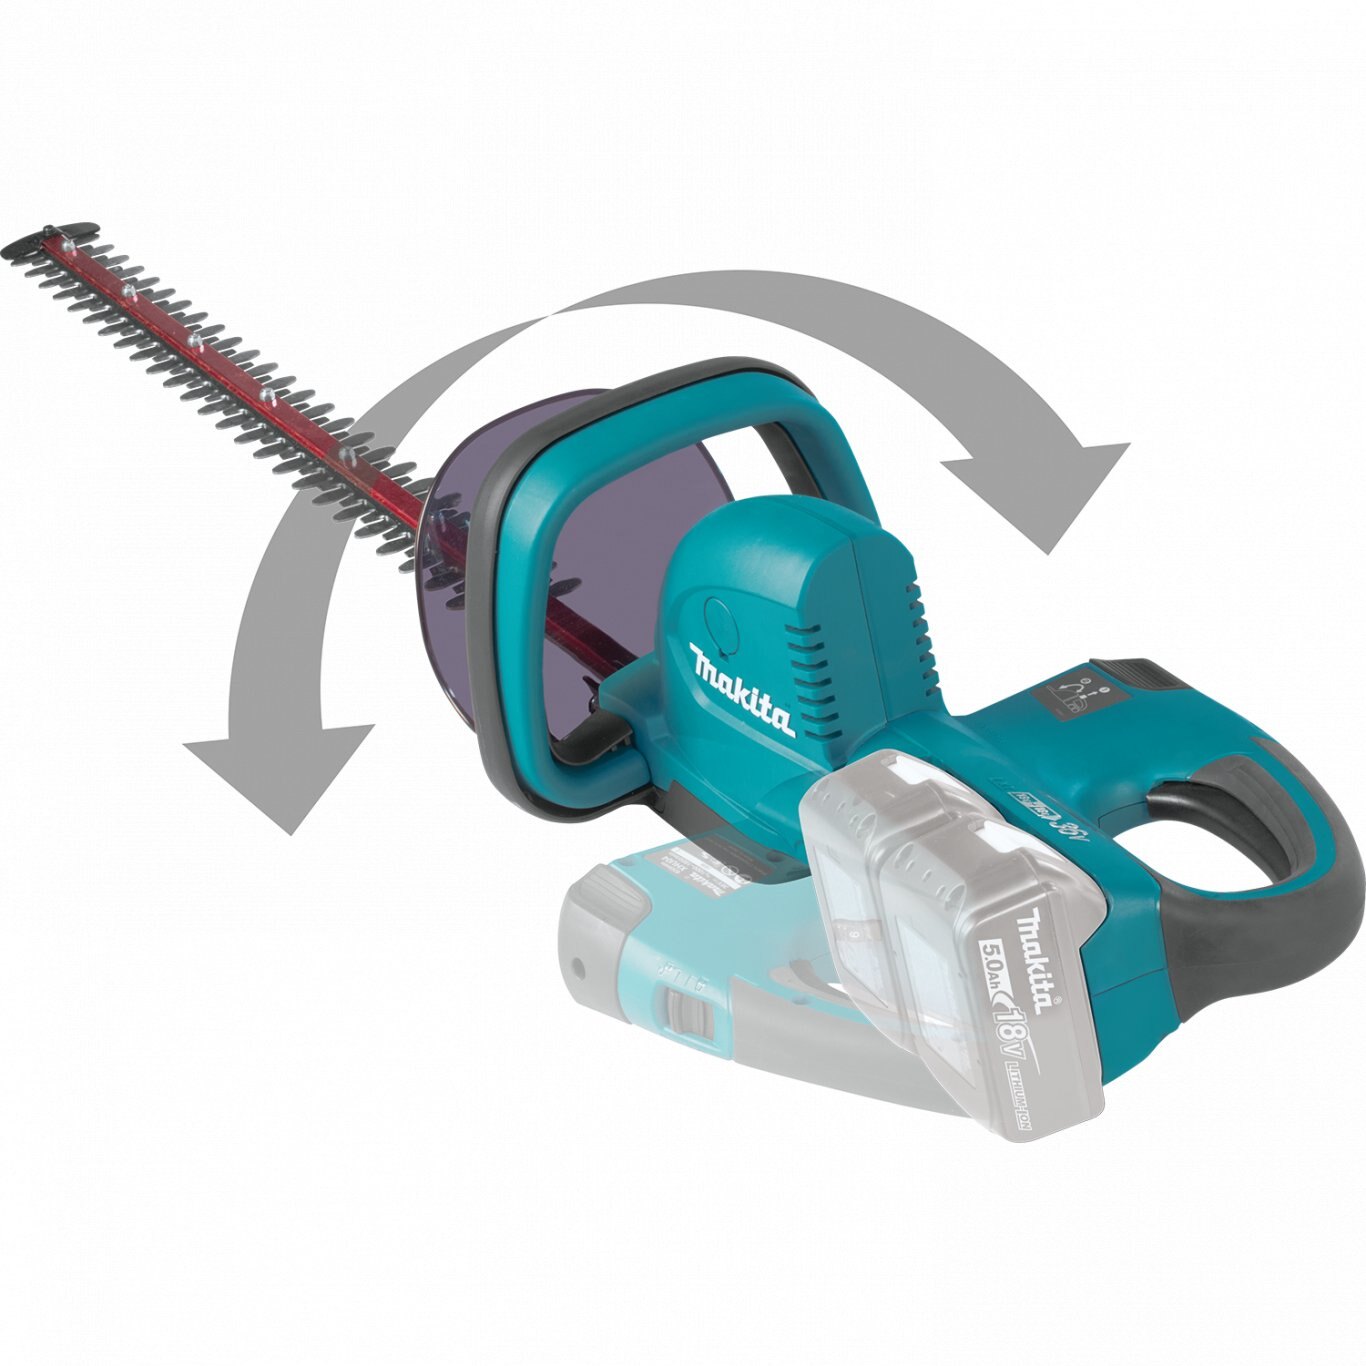 Makita 36V (18V X2) LXT® 25?1/2 Hedge Trimmer, Tool Only